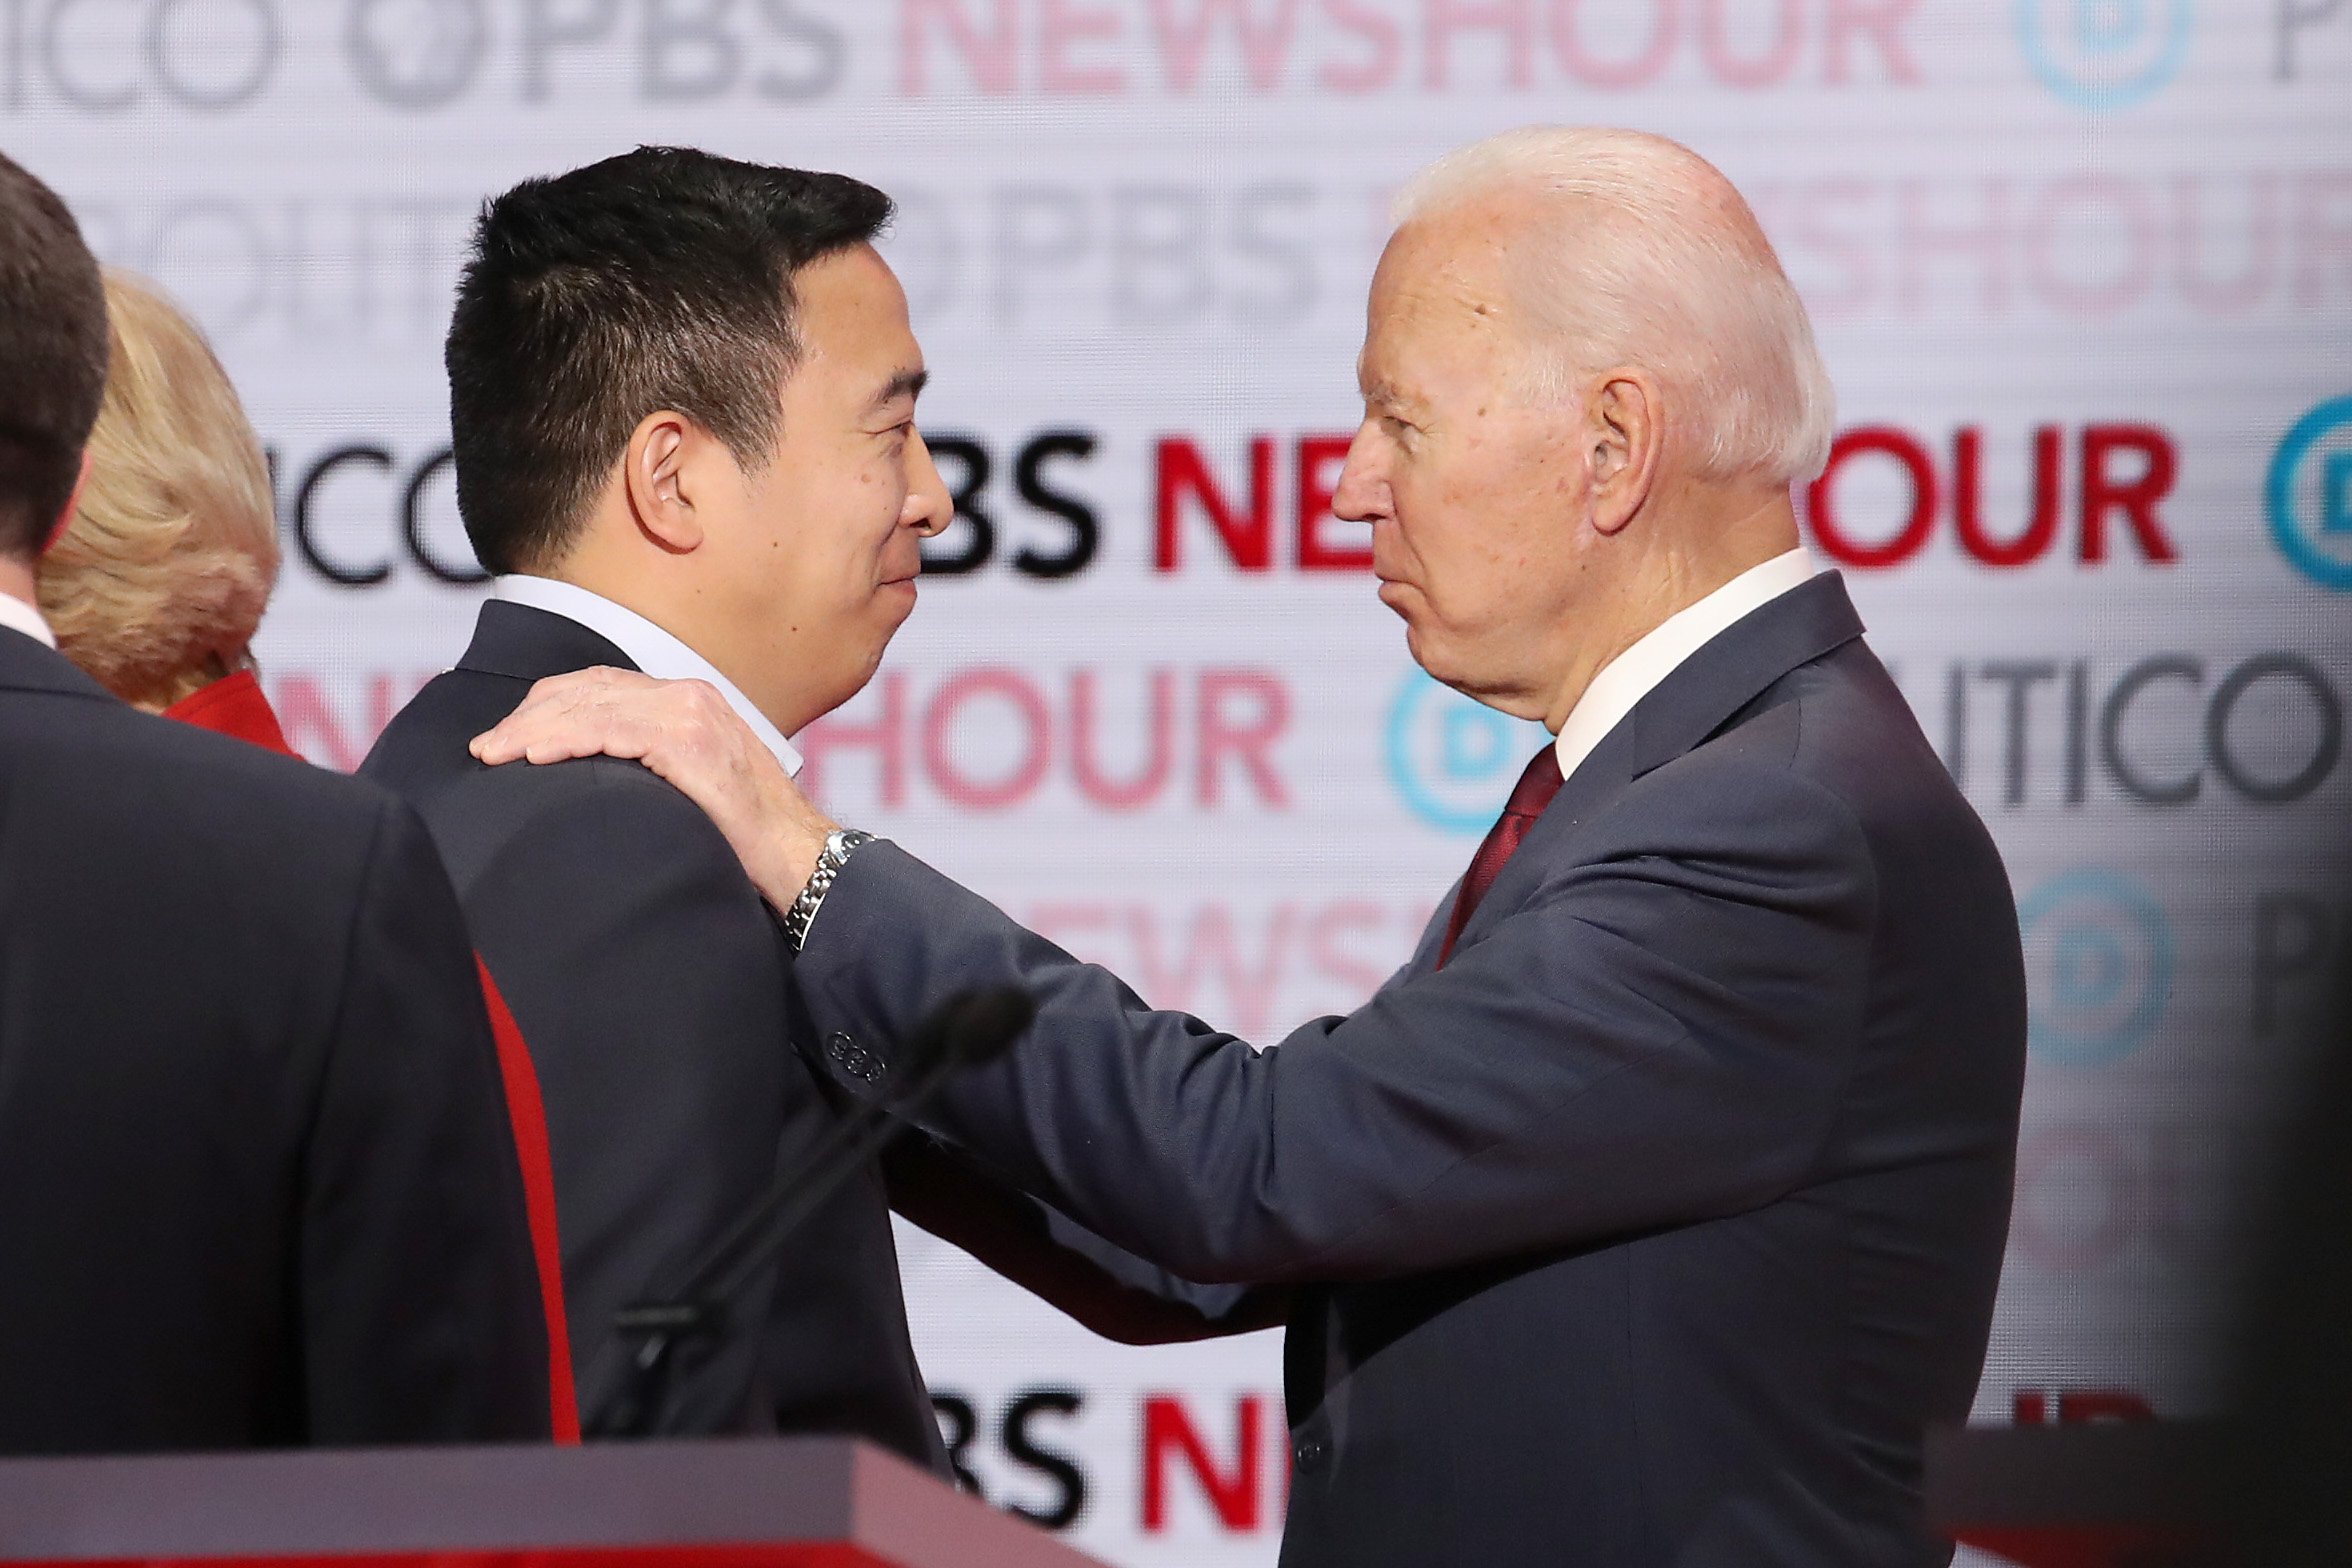 LOS ANGELES, CALIFORNIA - DECEMBER 19: Democratic presidential candidate Andrew Yang (L) speaks with former Vice President Joe Biden during the Democratic presidential primary debate at Loyola Marymount University on December 19, 2019 in Los Angeles, California. Seven candidates out of the crowded field qualified for the 6th and last Democratic presidential primary debate of 2019 hosted by PBS NewsHour and Politico. (Photo by Justin Sullivan/Getty Images)